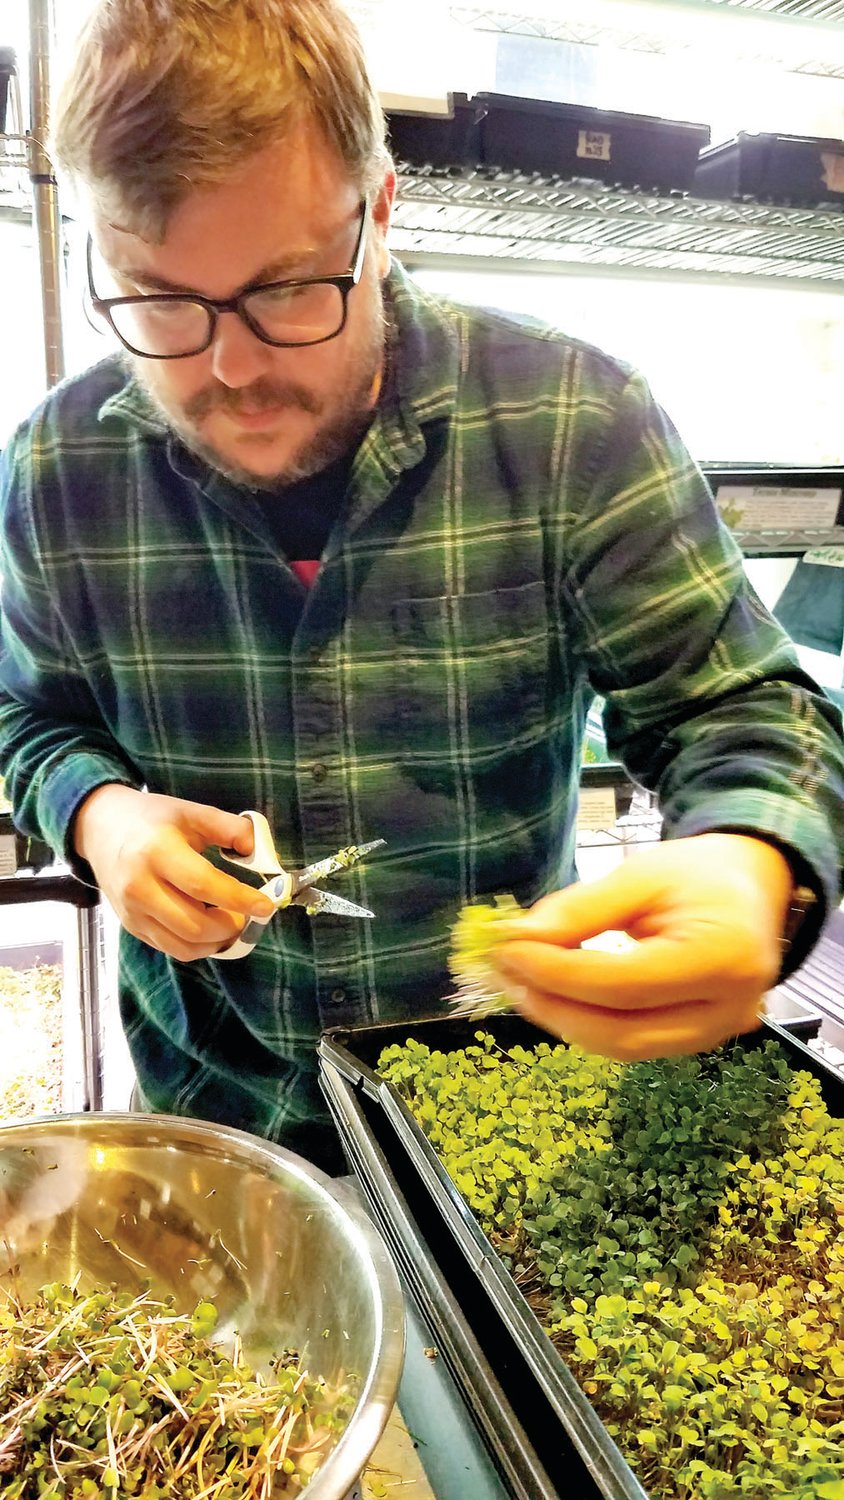 Robert Gerenser trims microgreens at his stand at the Stockton Farmers Market in Stockton, N.J.